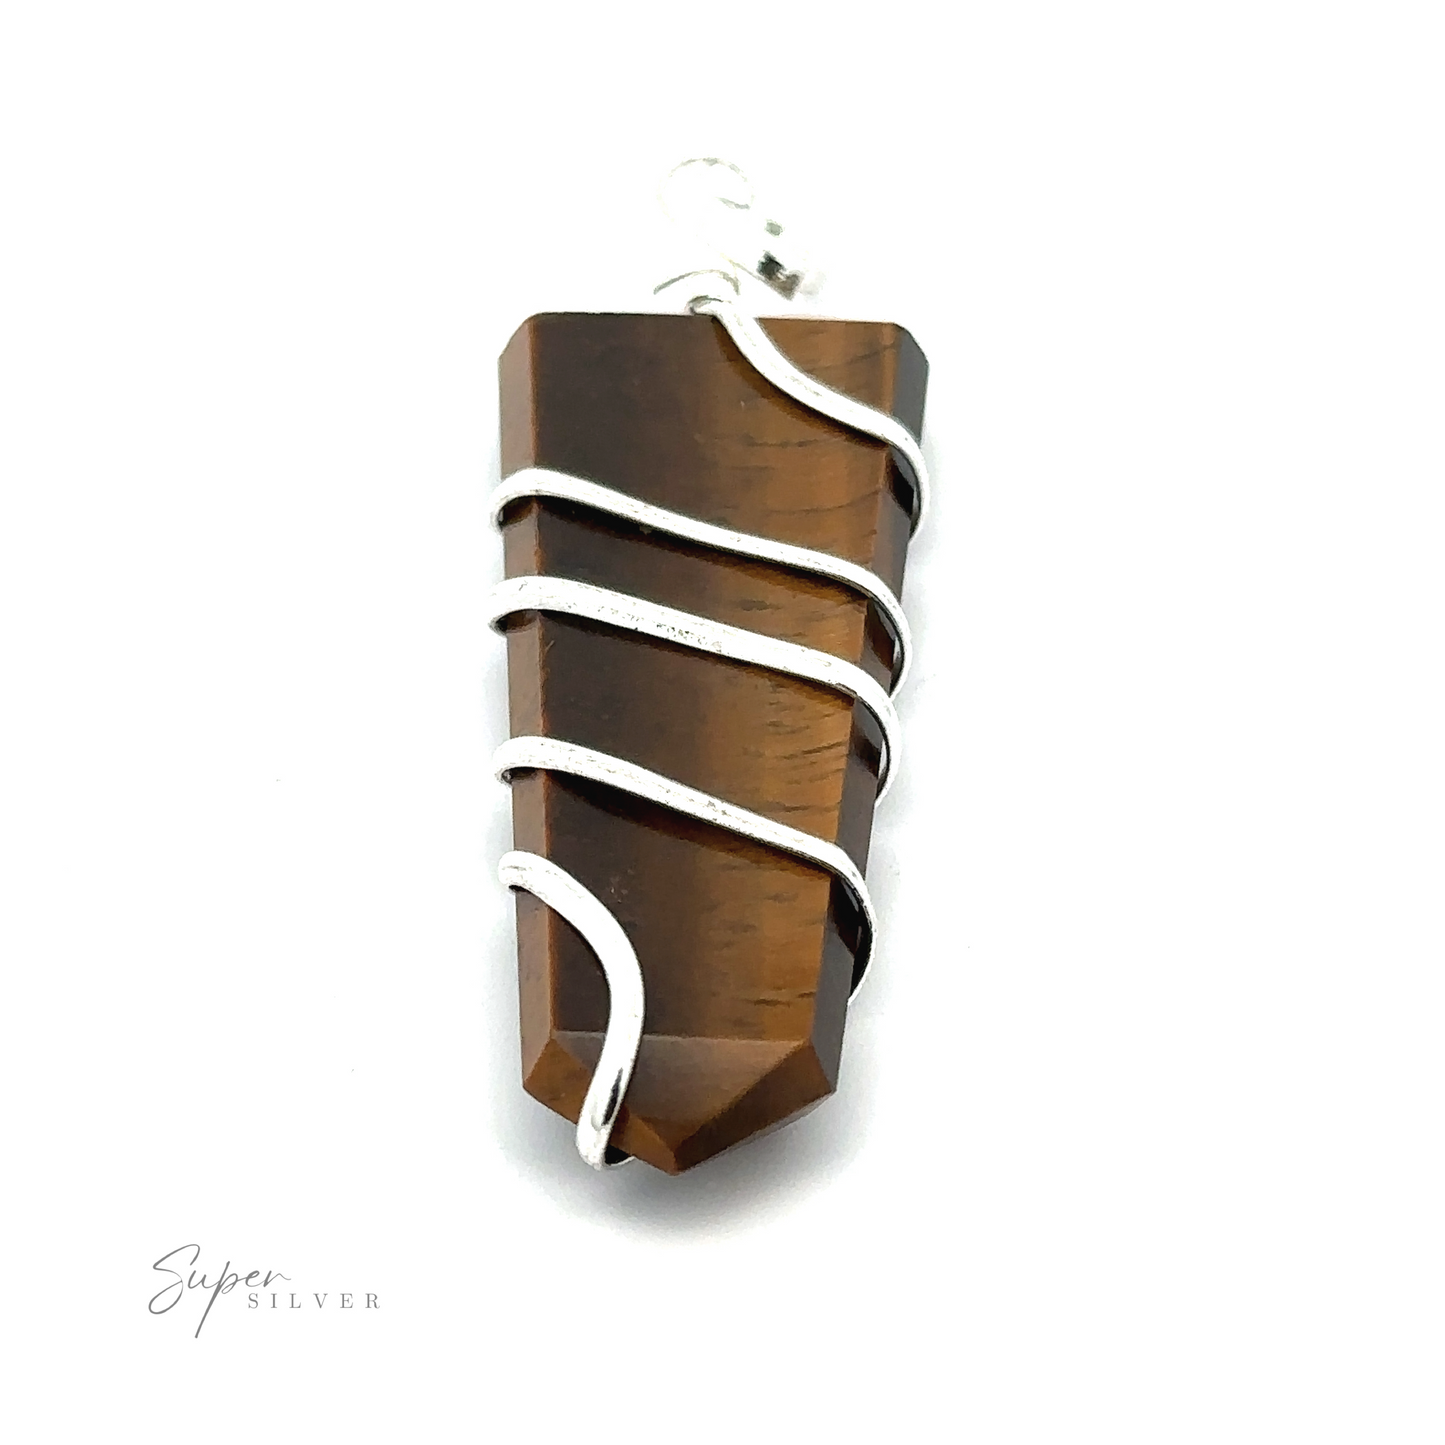 
                  
                    A brown crystal pendant wrapped in silver wire with a loop at the top, labeled "Wire Wrapped Slab Pendant" at the bottom left. This exquisite gemstone jewelry piece showcases the art of wire wrapping at its finest.
                  
                